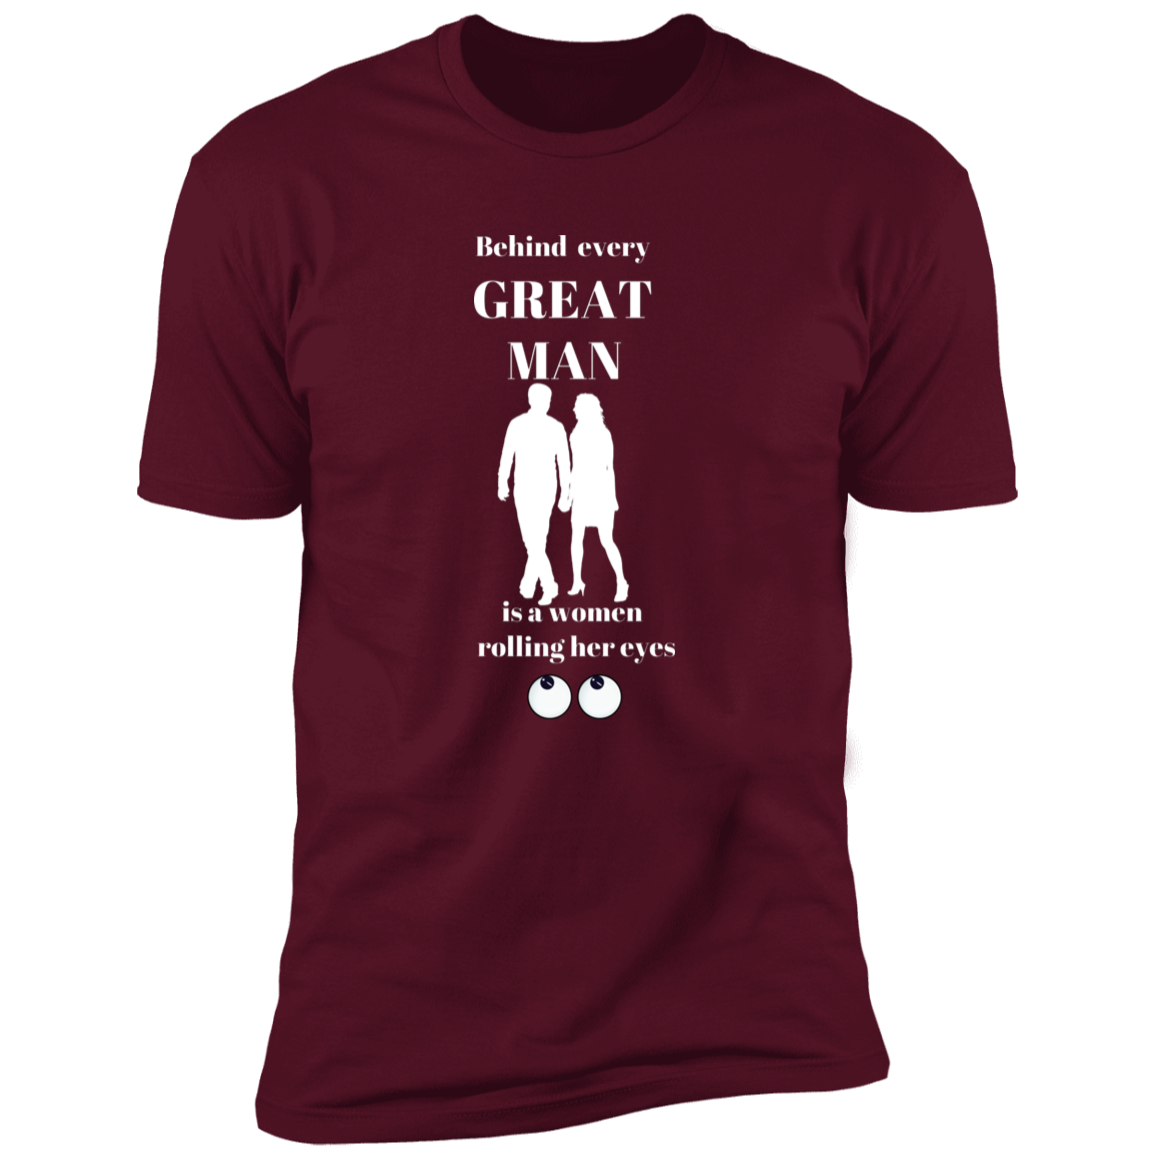 BEHIND EVERY GREAT MAN T-SHIRT WHT